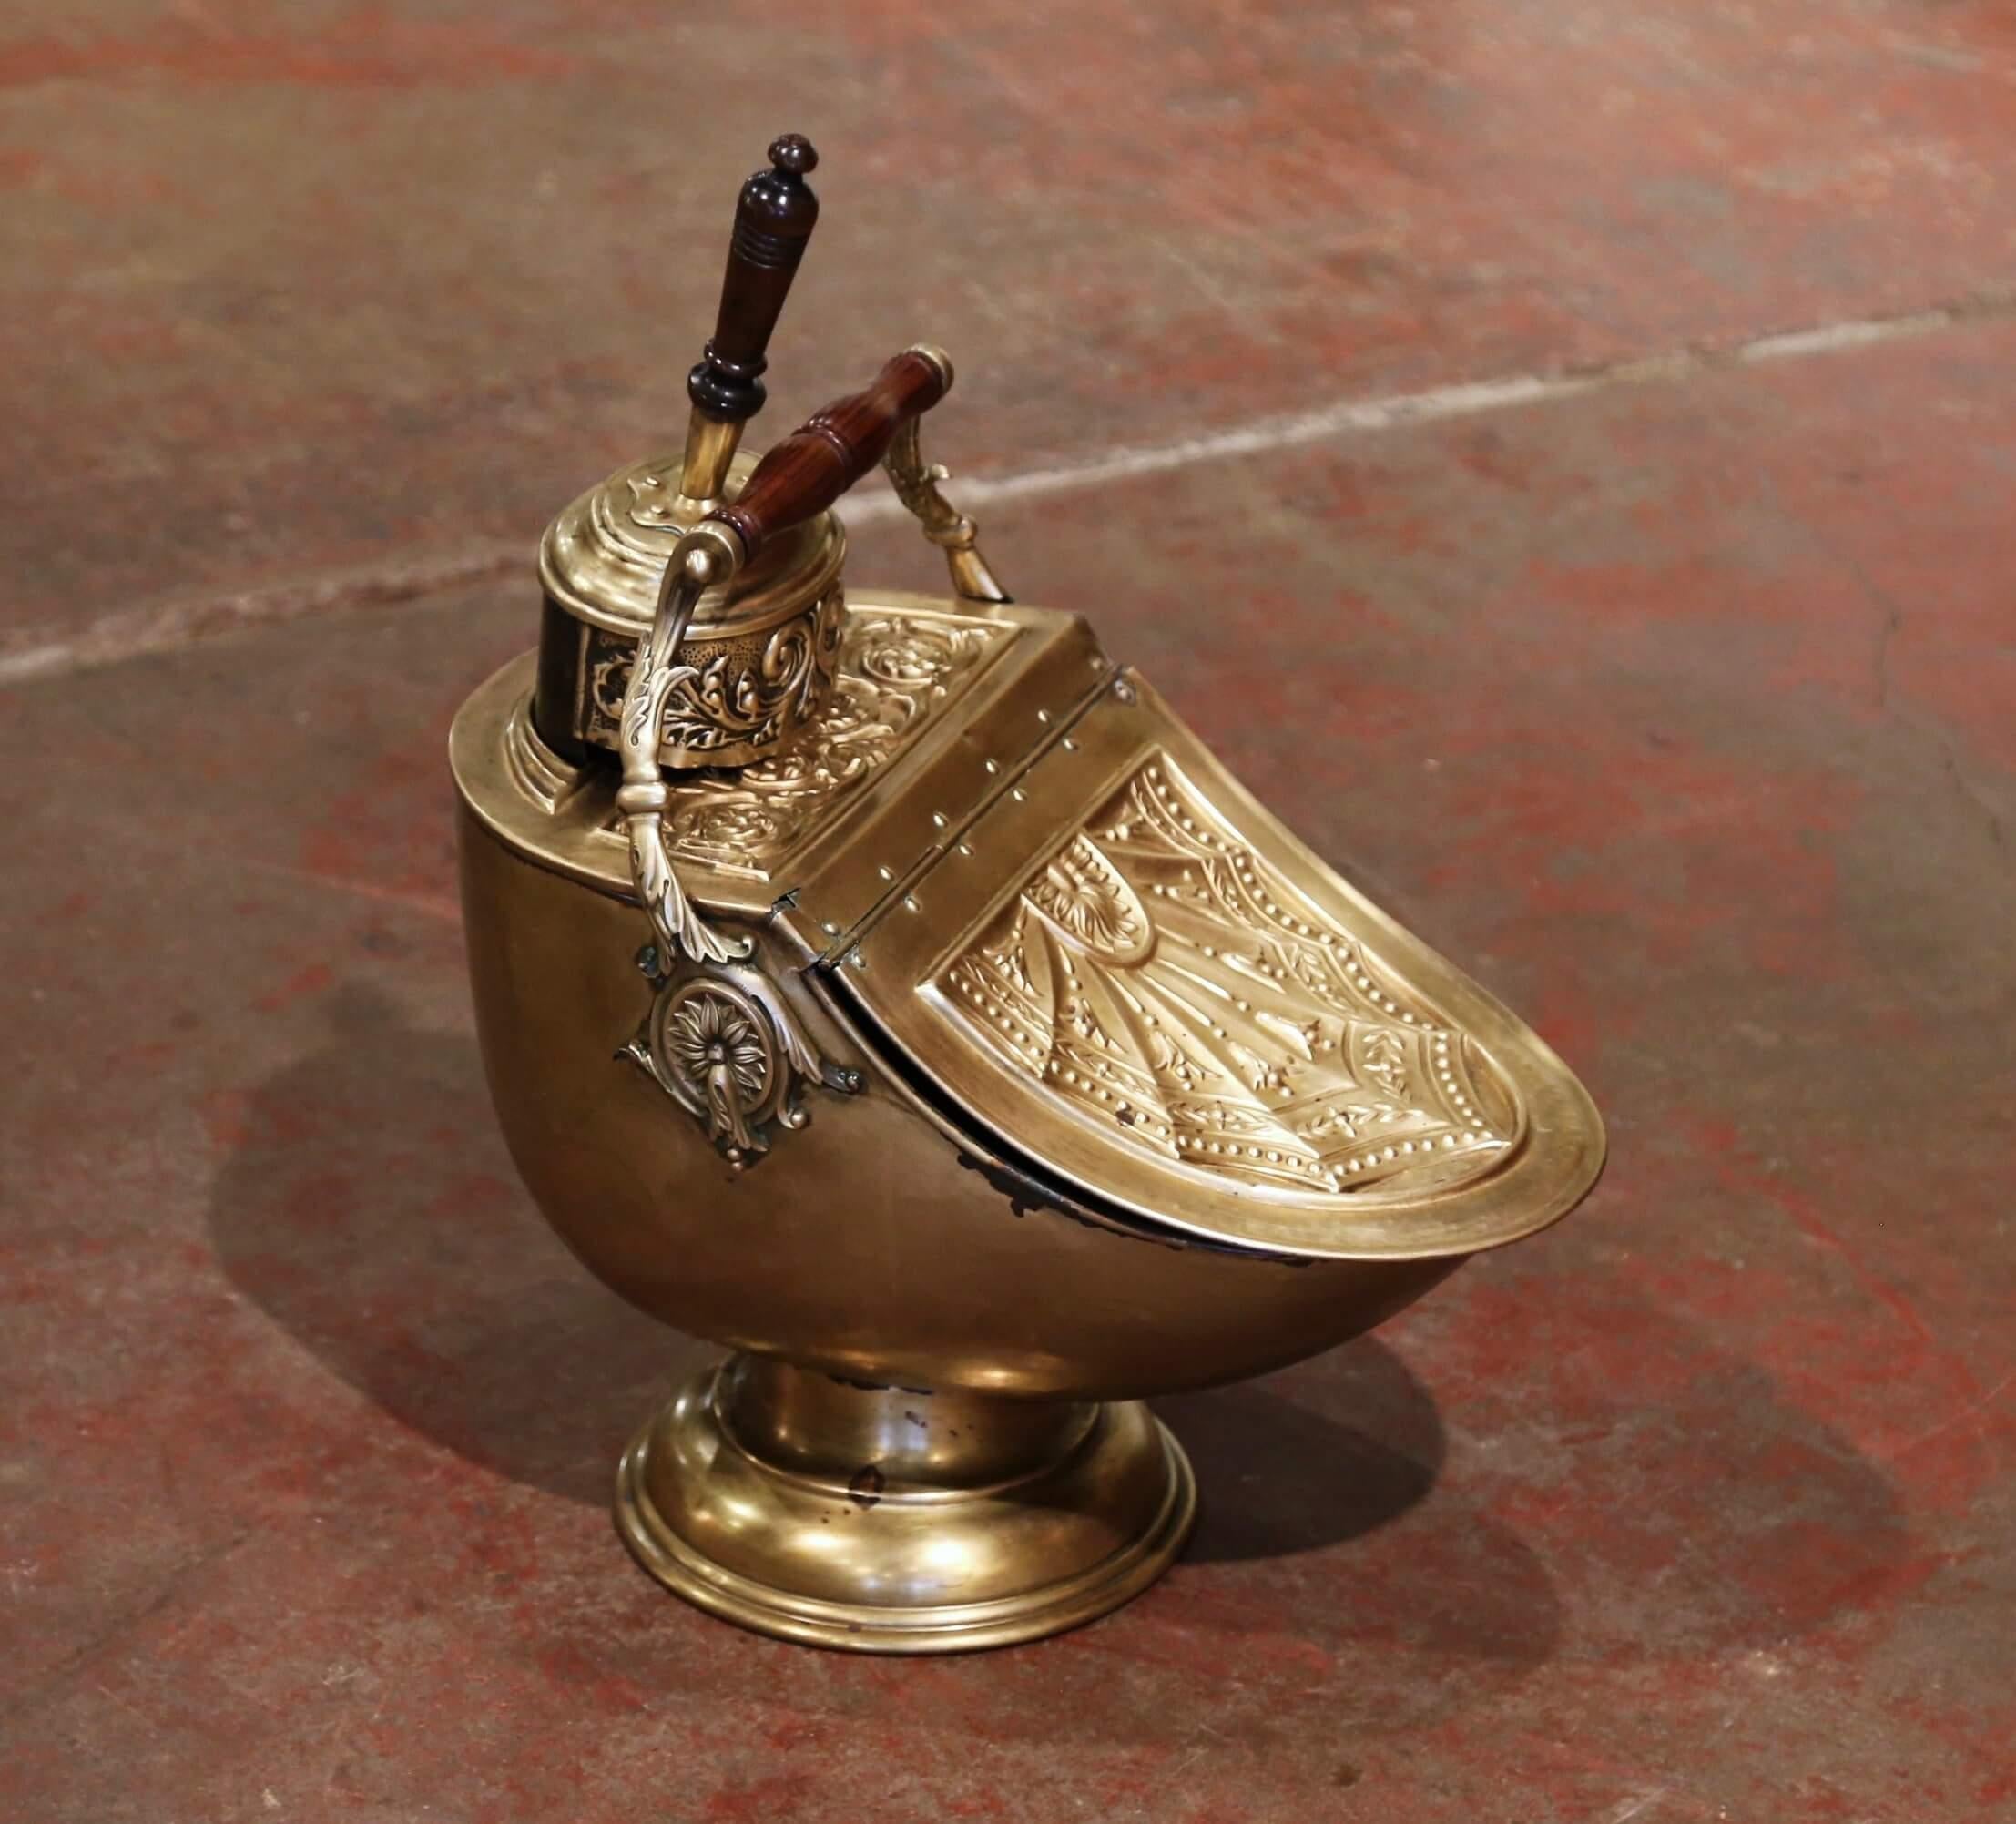 This antique coal scuttle was created in England, circa 1880. Built of brass with foliage repousse decor, the patinated bucket stands on a round base and features a large turned walnut handle at the pediment, the original brass scoop with wooden